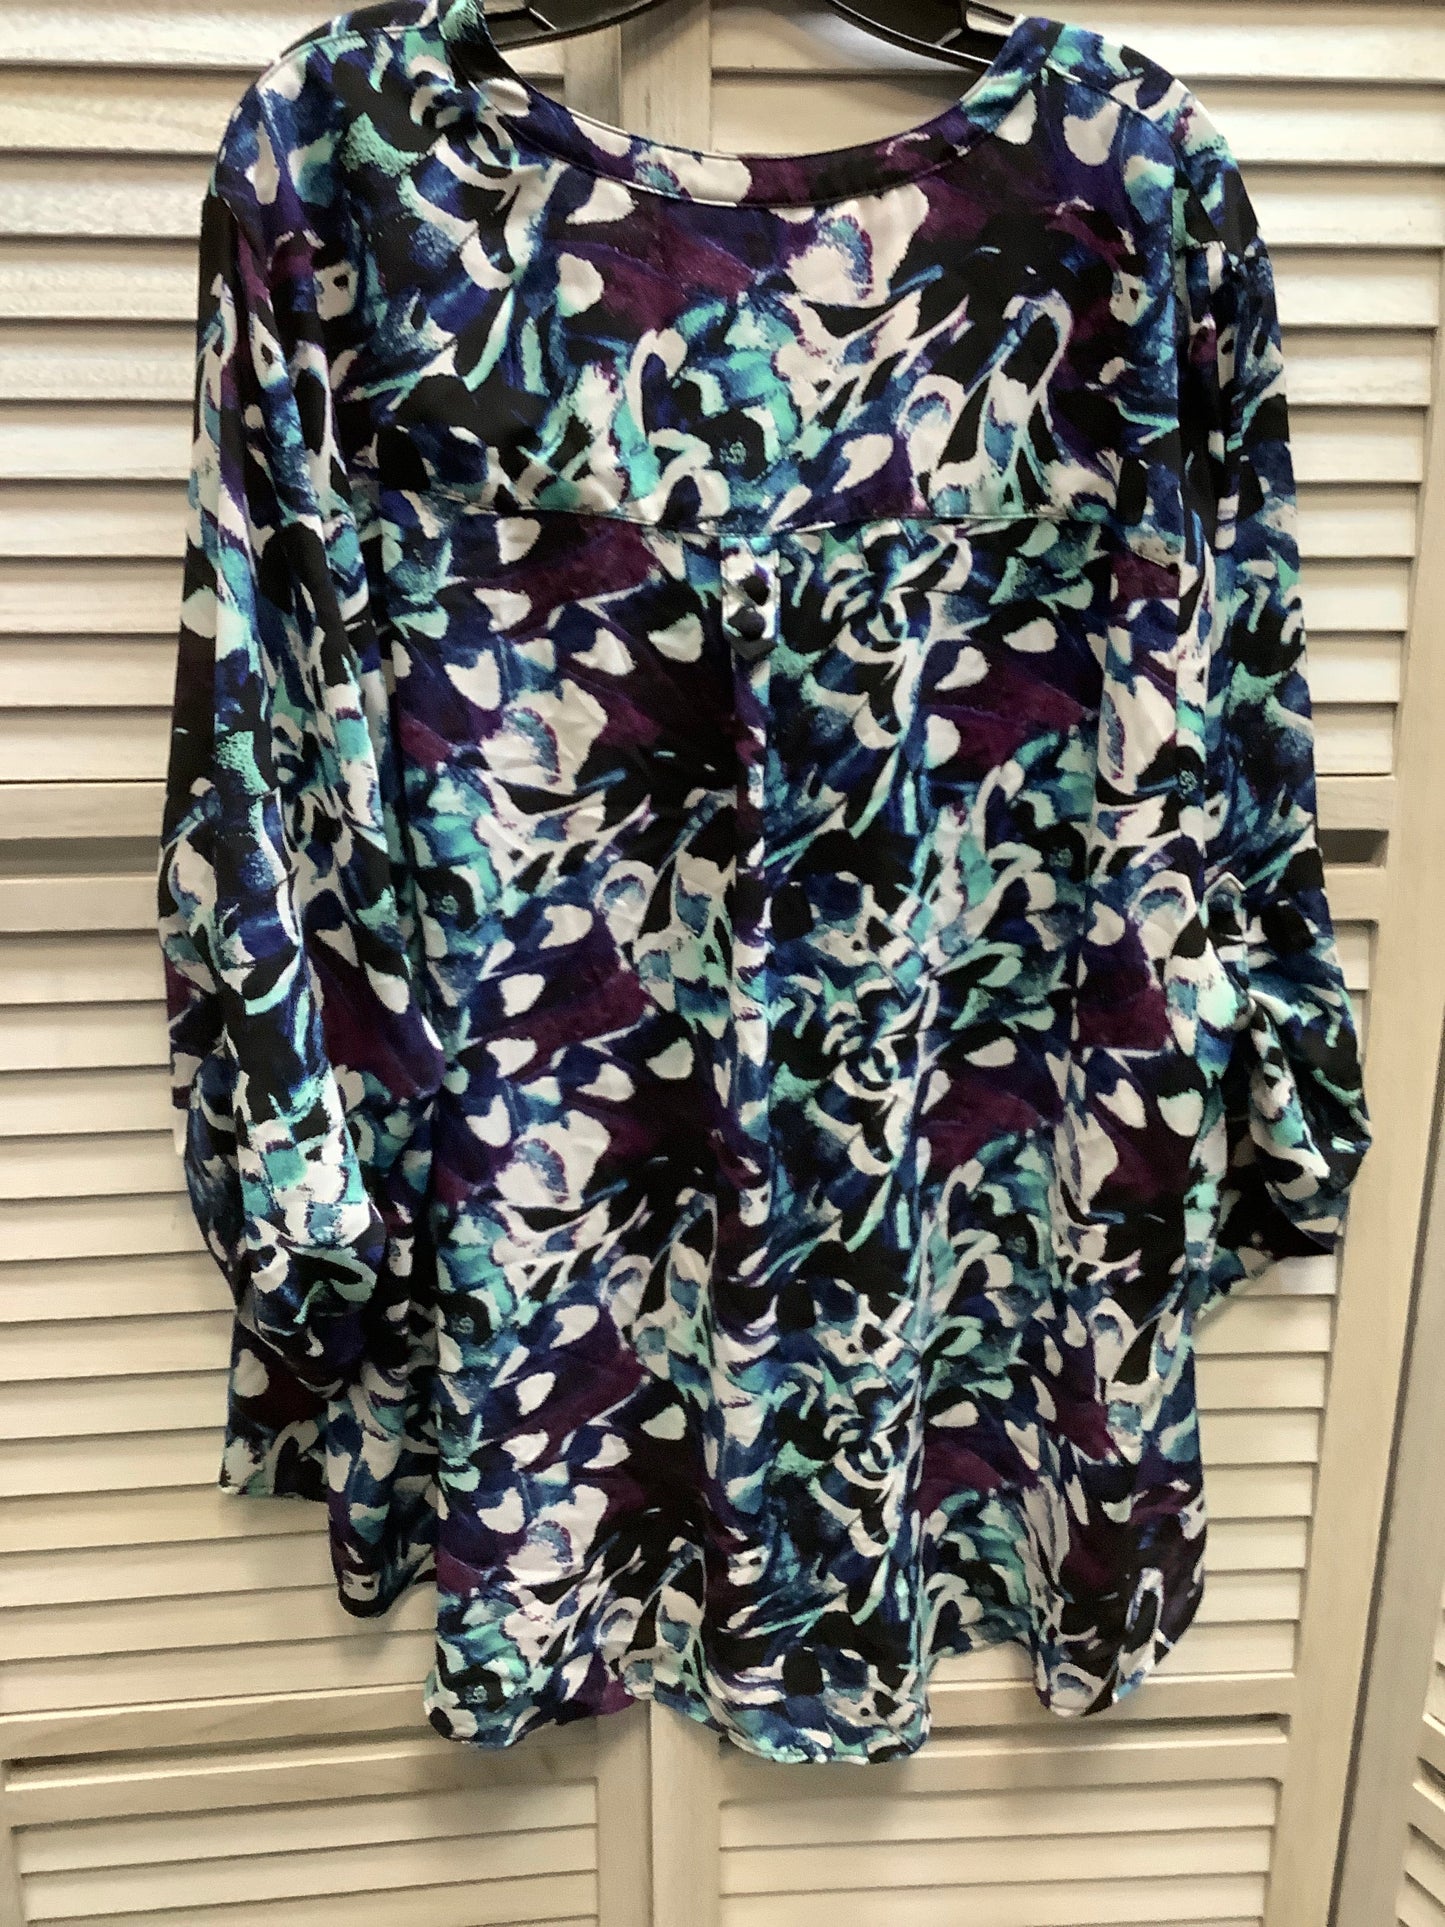 Multi-colored Top Long Sleeve Torrid, Size 4x